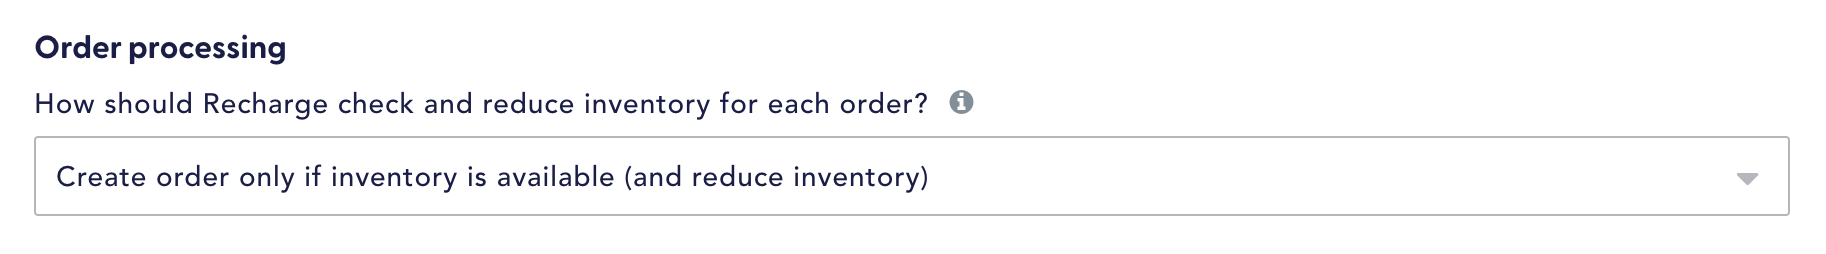 Order processing inventory settings in the Recharge Dashboard